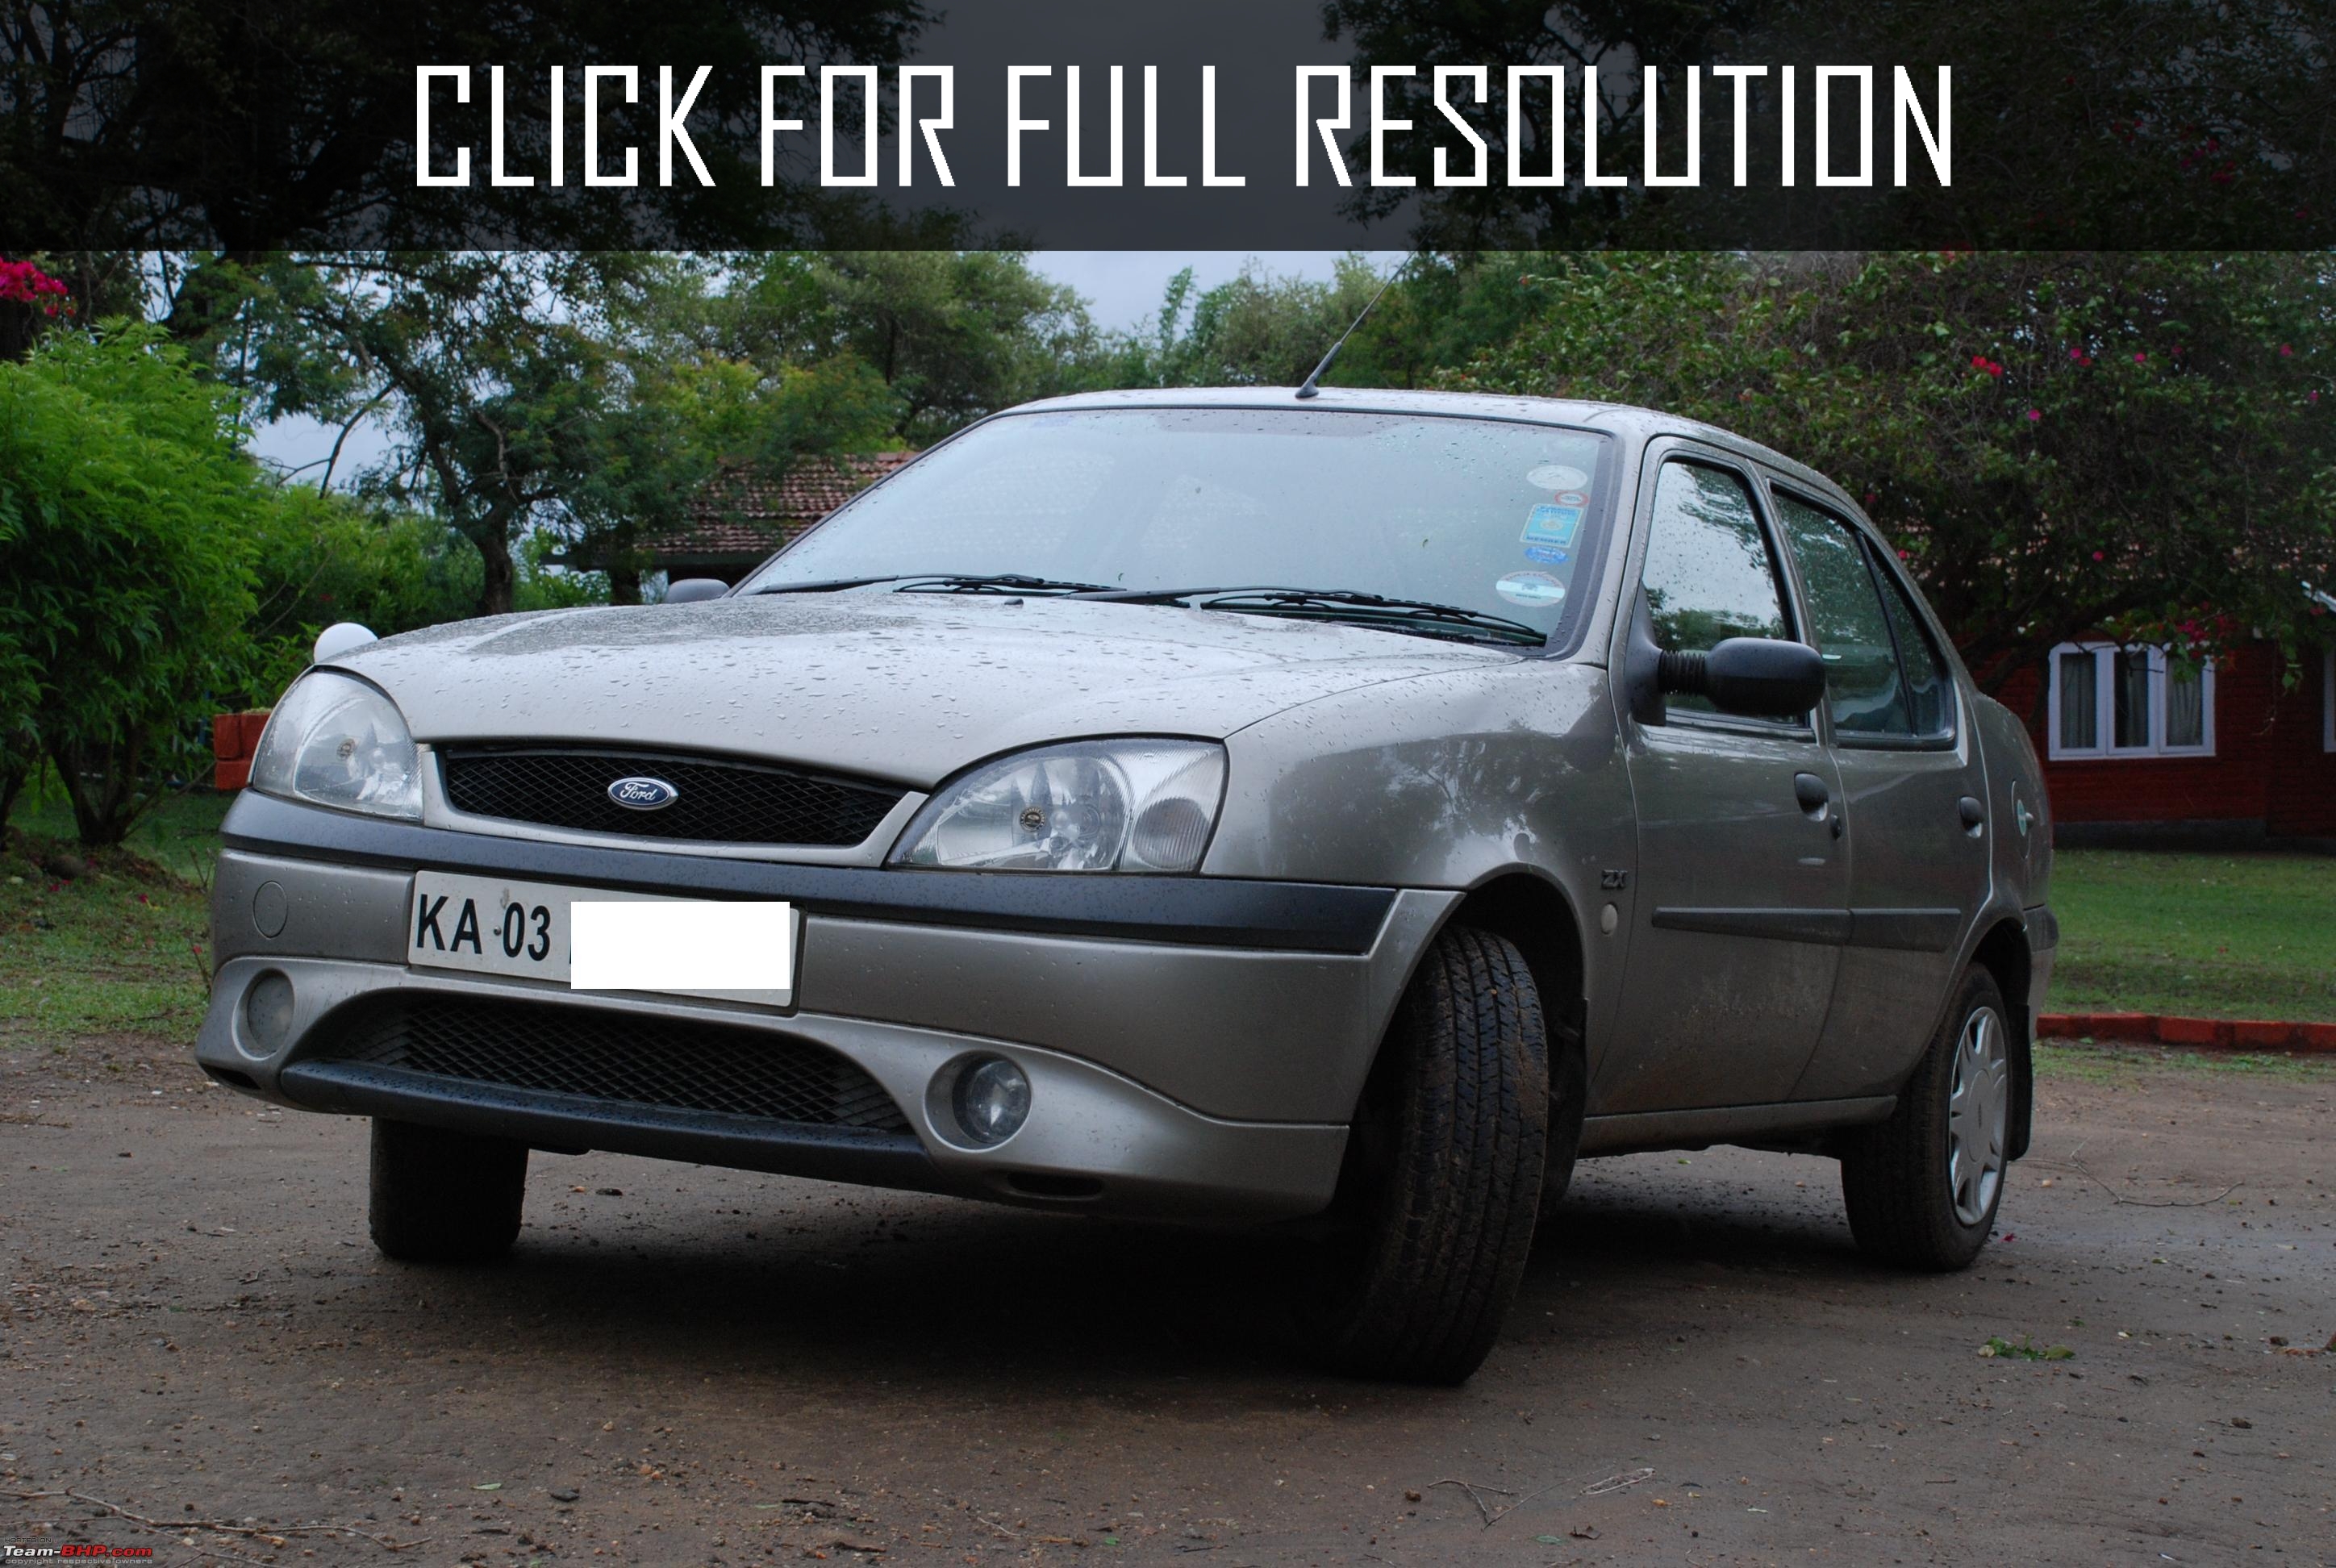 Ford Ikon 1.6 - reviews, prices, ratings with various photos